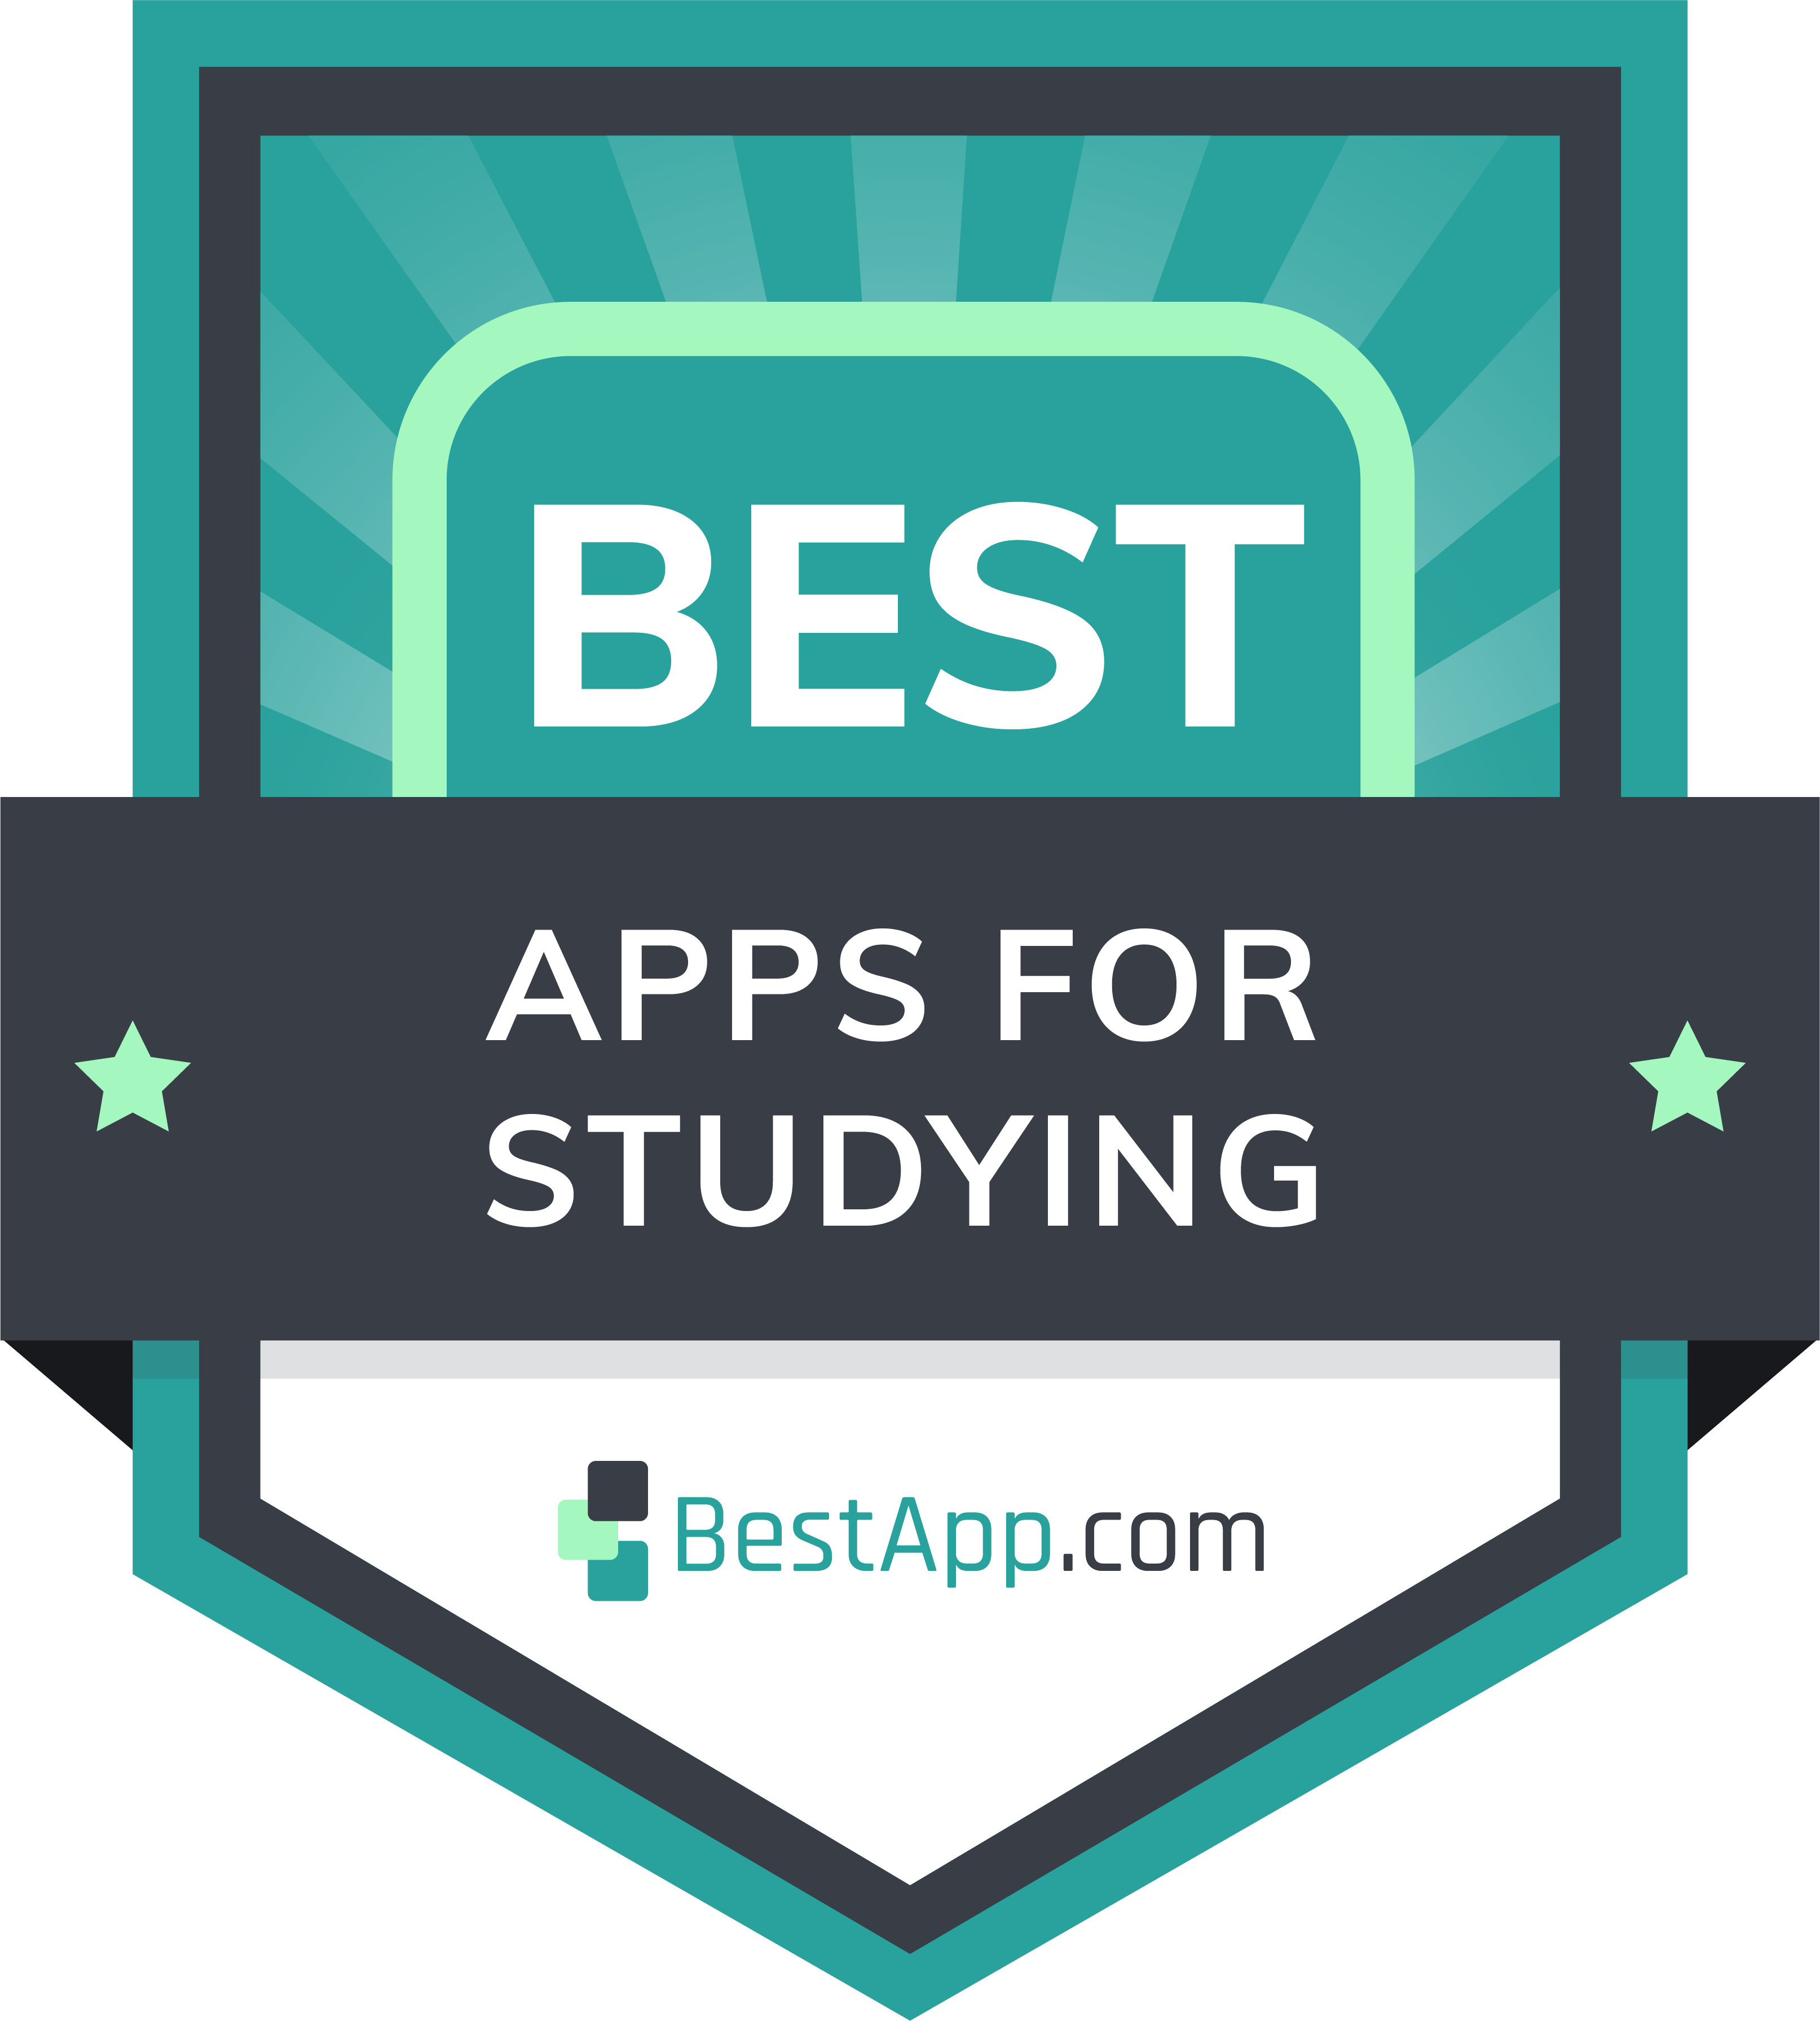 Best Apps for Studying Badge